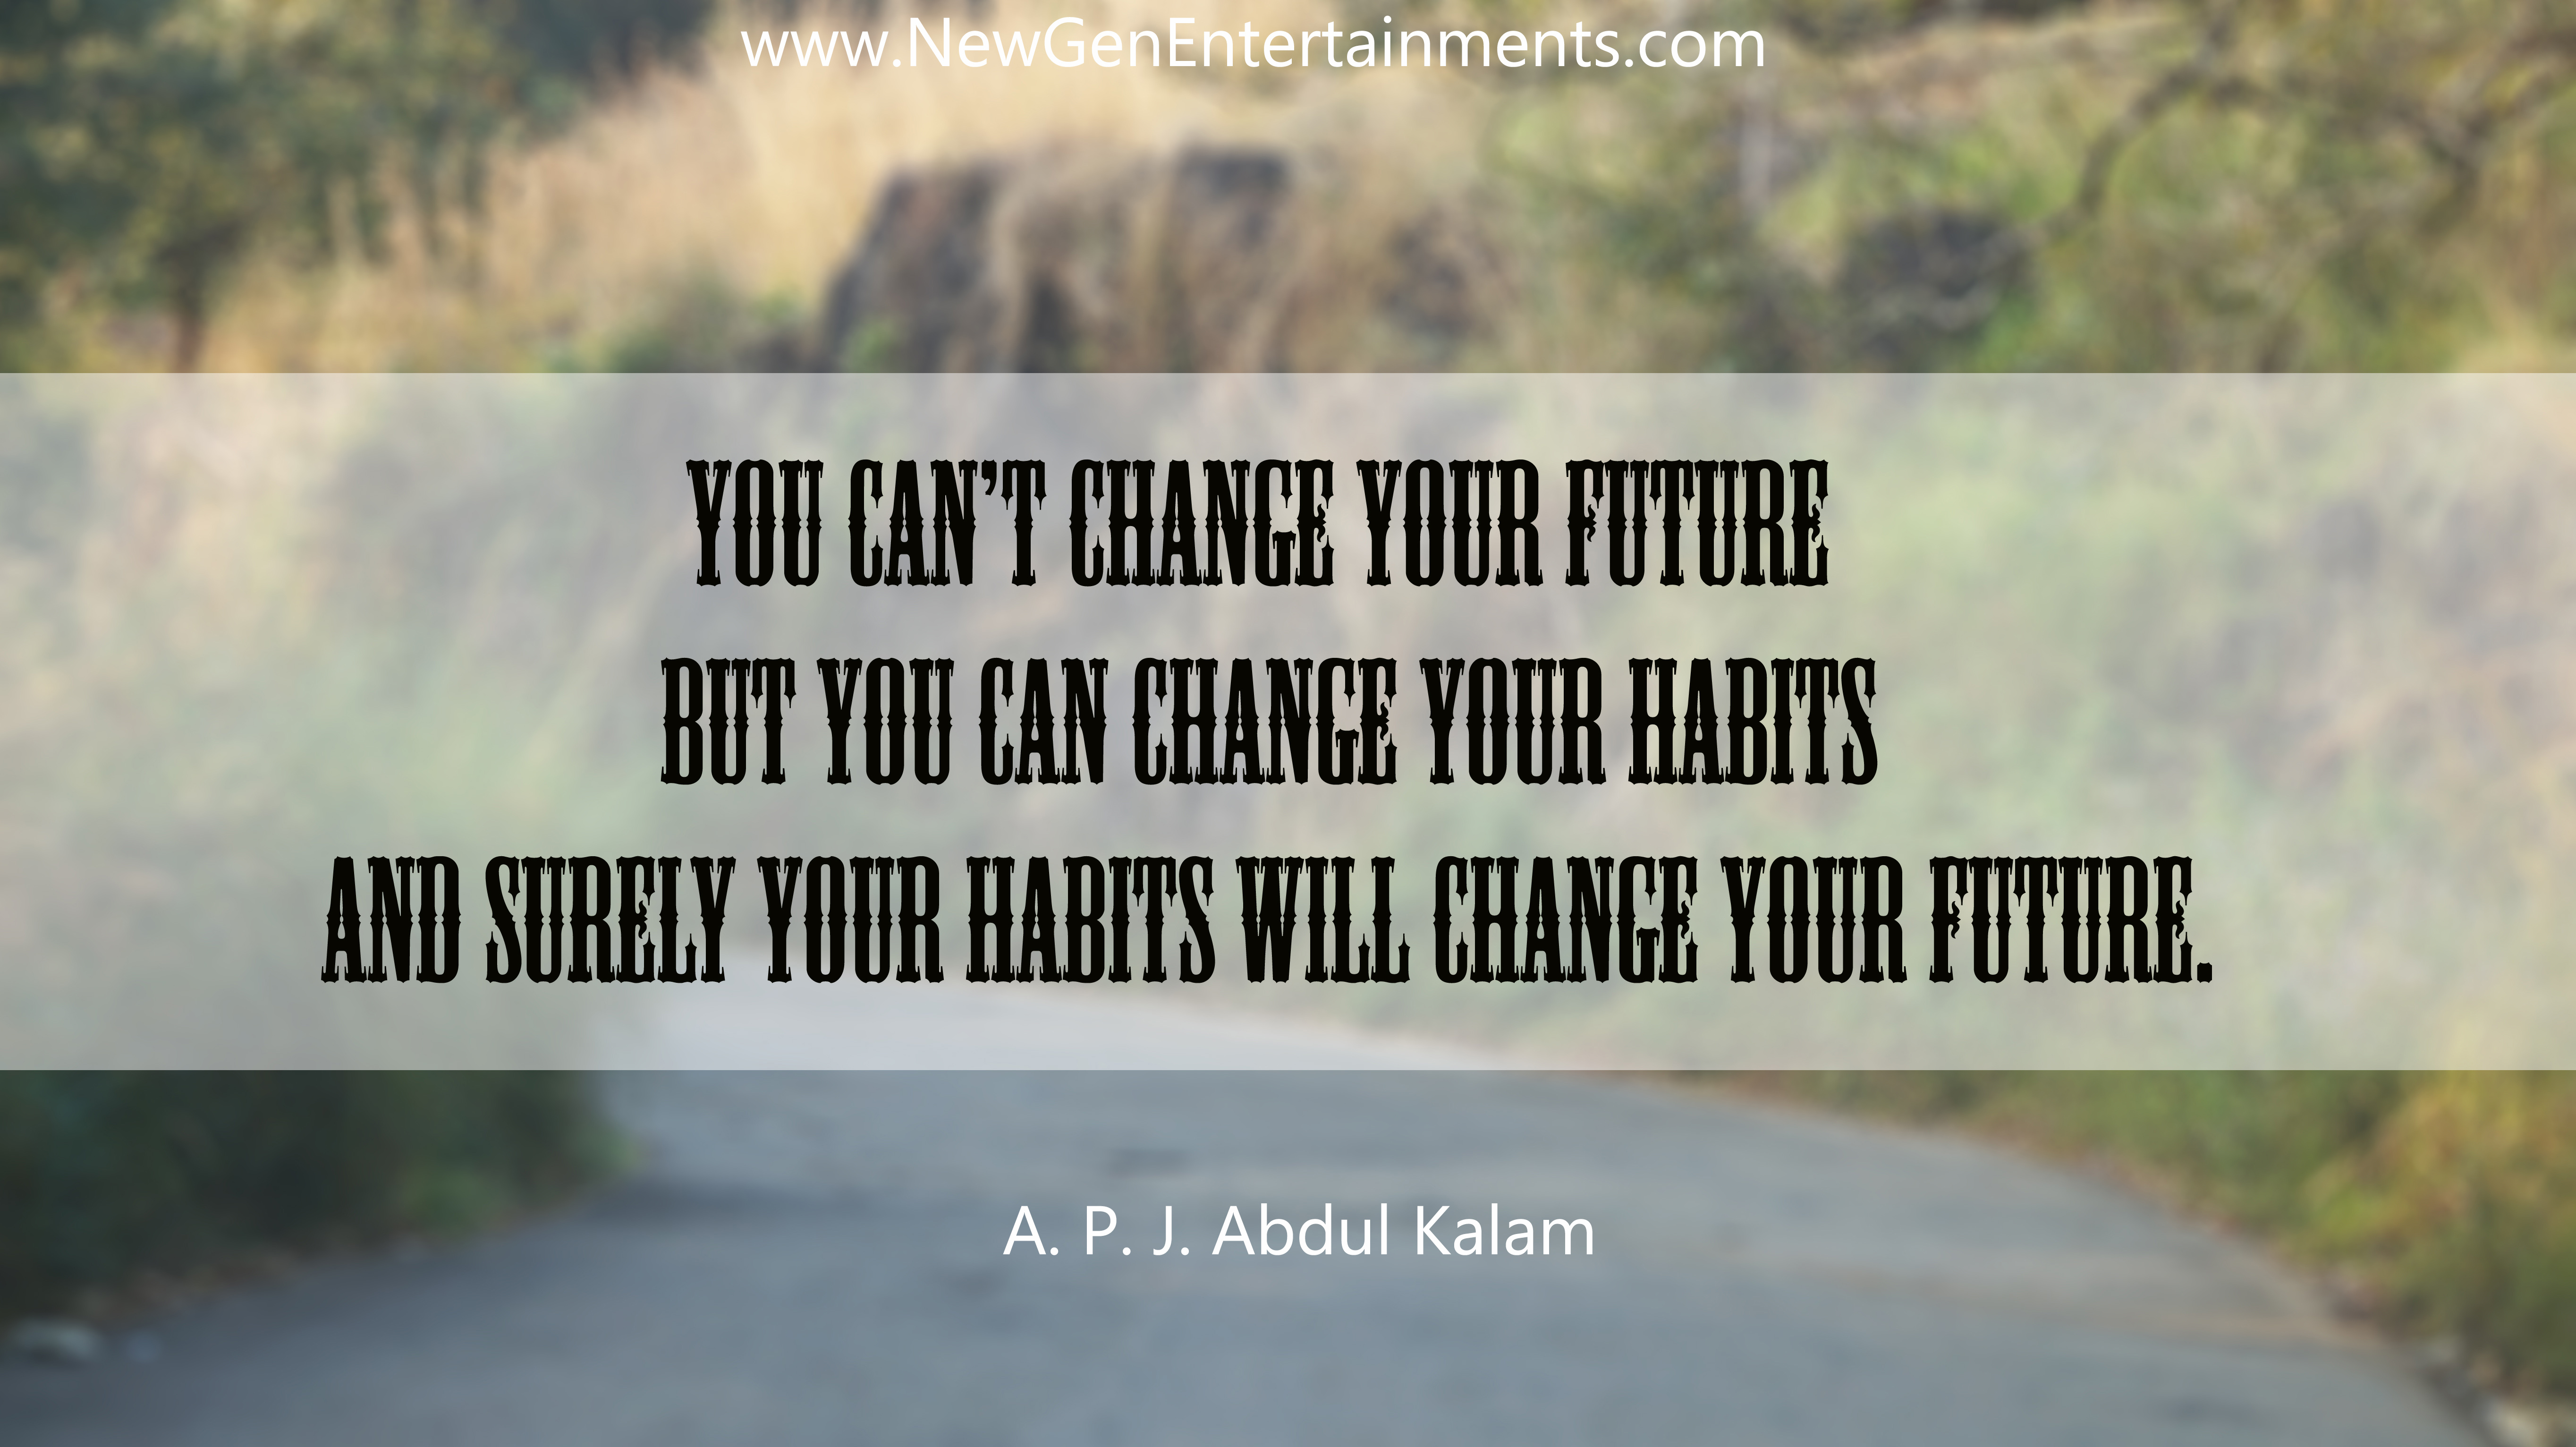 You can’t change your future but you can change your habits and surely your habits will change your future